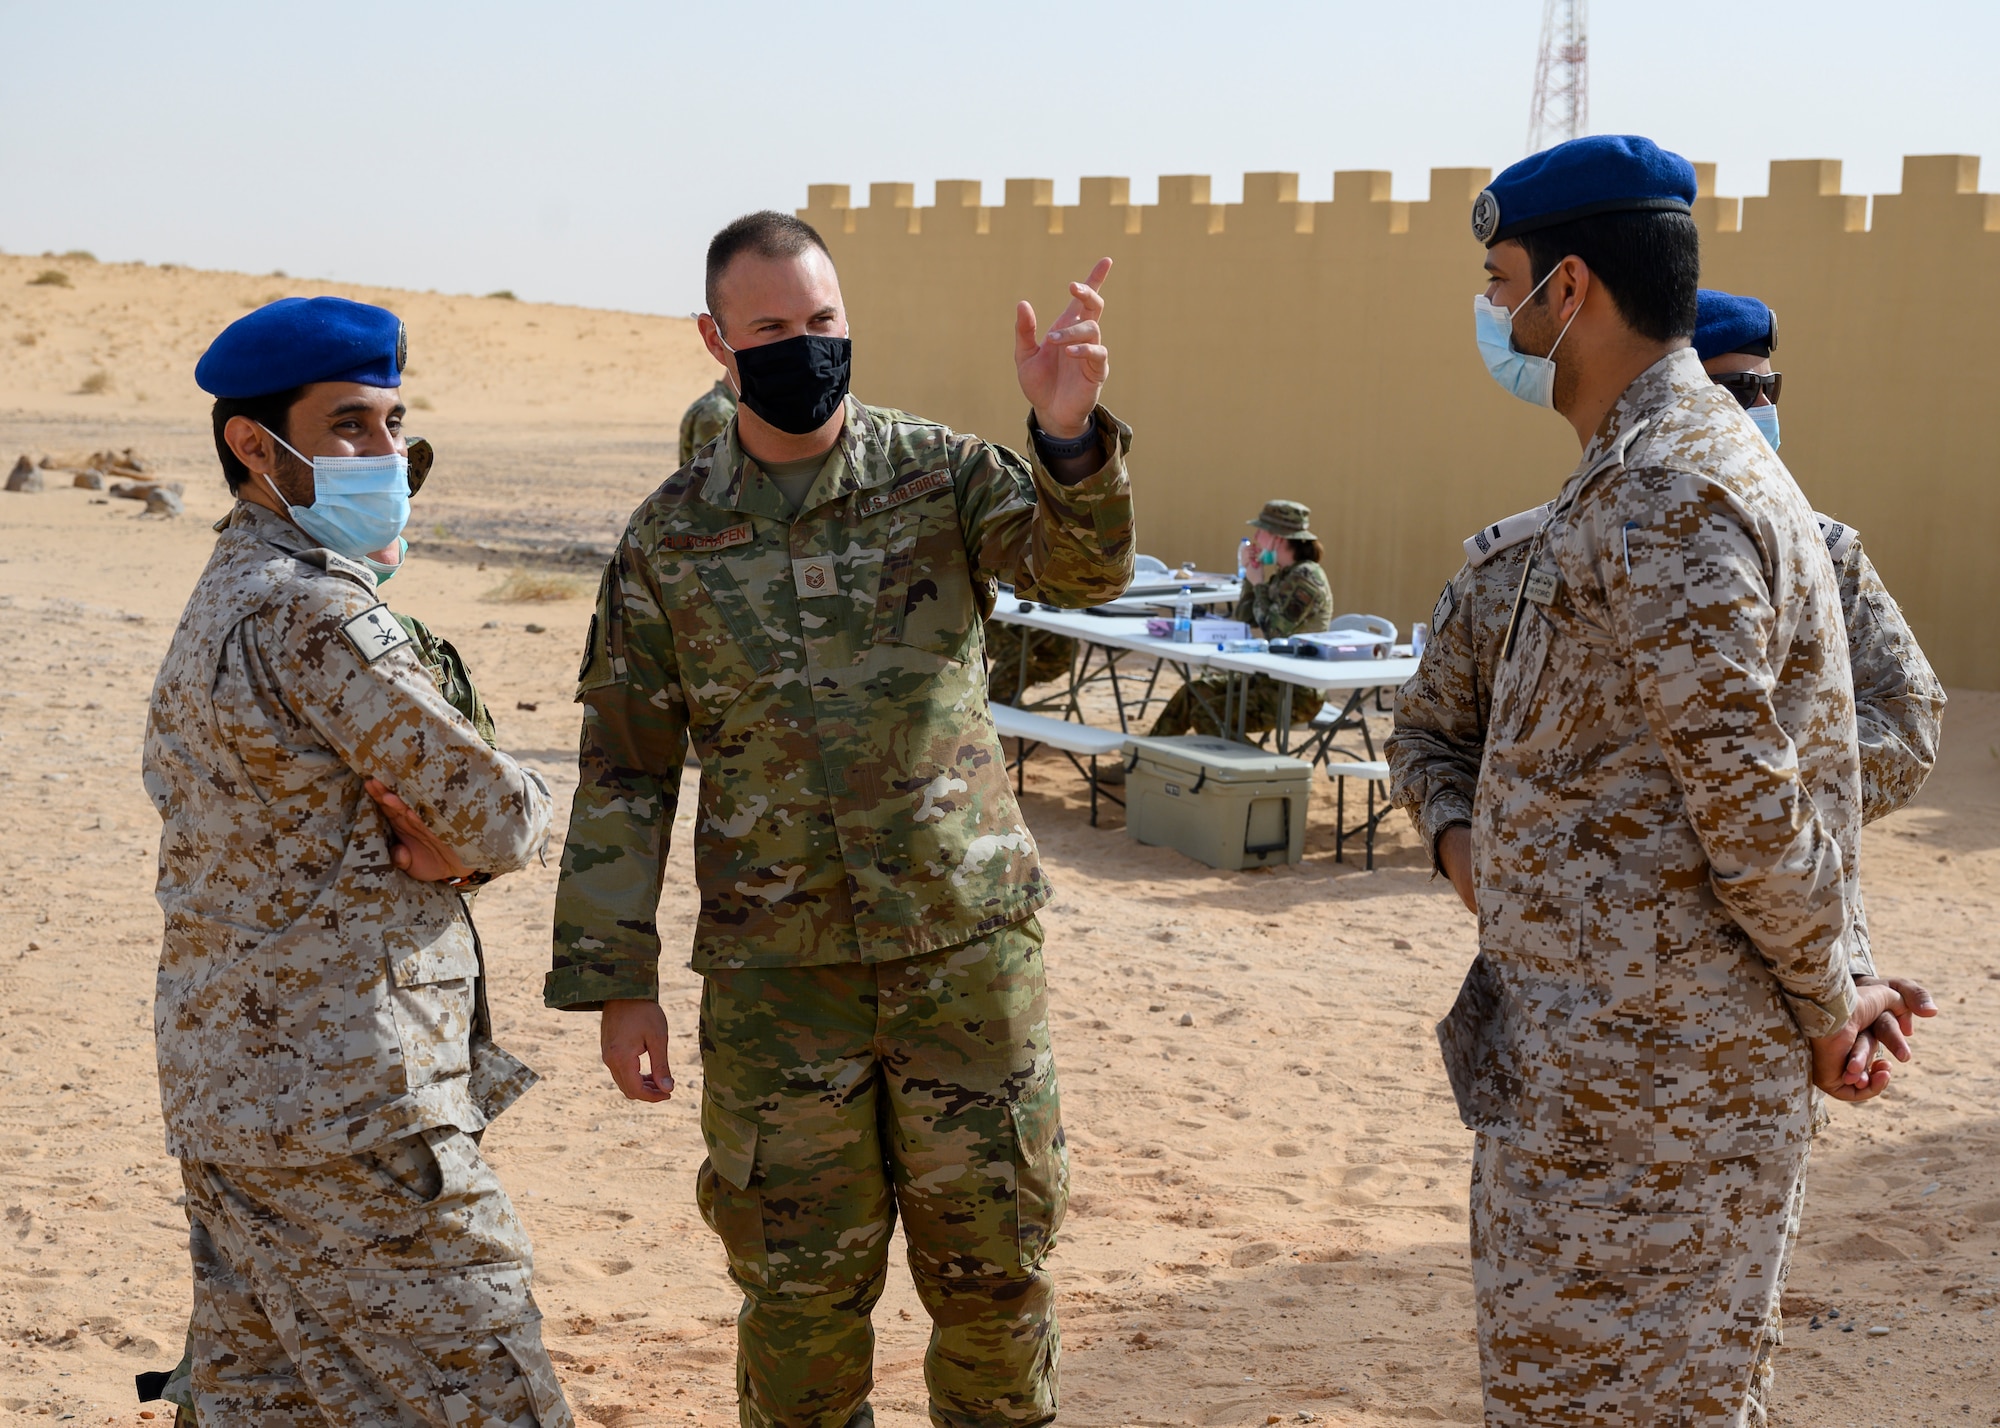 Master Sgt. Nathan Hargrafen, U.S. Air Force Master Sgt. Nathan Hargrafen, 378th Civil Engineer Squadron emergency management flight chief, explains the steps of  a chemical, biological, radiological and nuclear response exercise with members of the Royal Saudi Air Force, Prince Sultan Air Base, Kingdom of Saudi Arabia, May 26, 2021. The combined exercise demonstrates the emergency management integration between USAF and RSAF CBRN response units while also familiarizing each unit with the other’s techniques and procedures.  (U.S. Air Force photo by Senior Airman Samuel Earick)